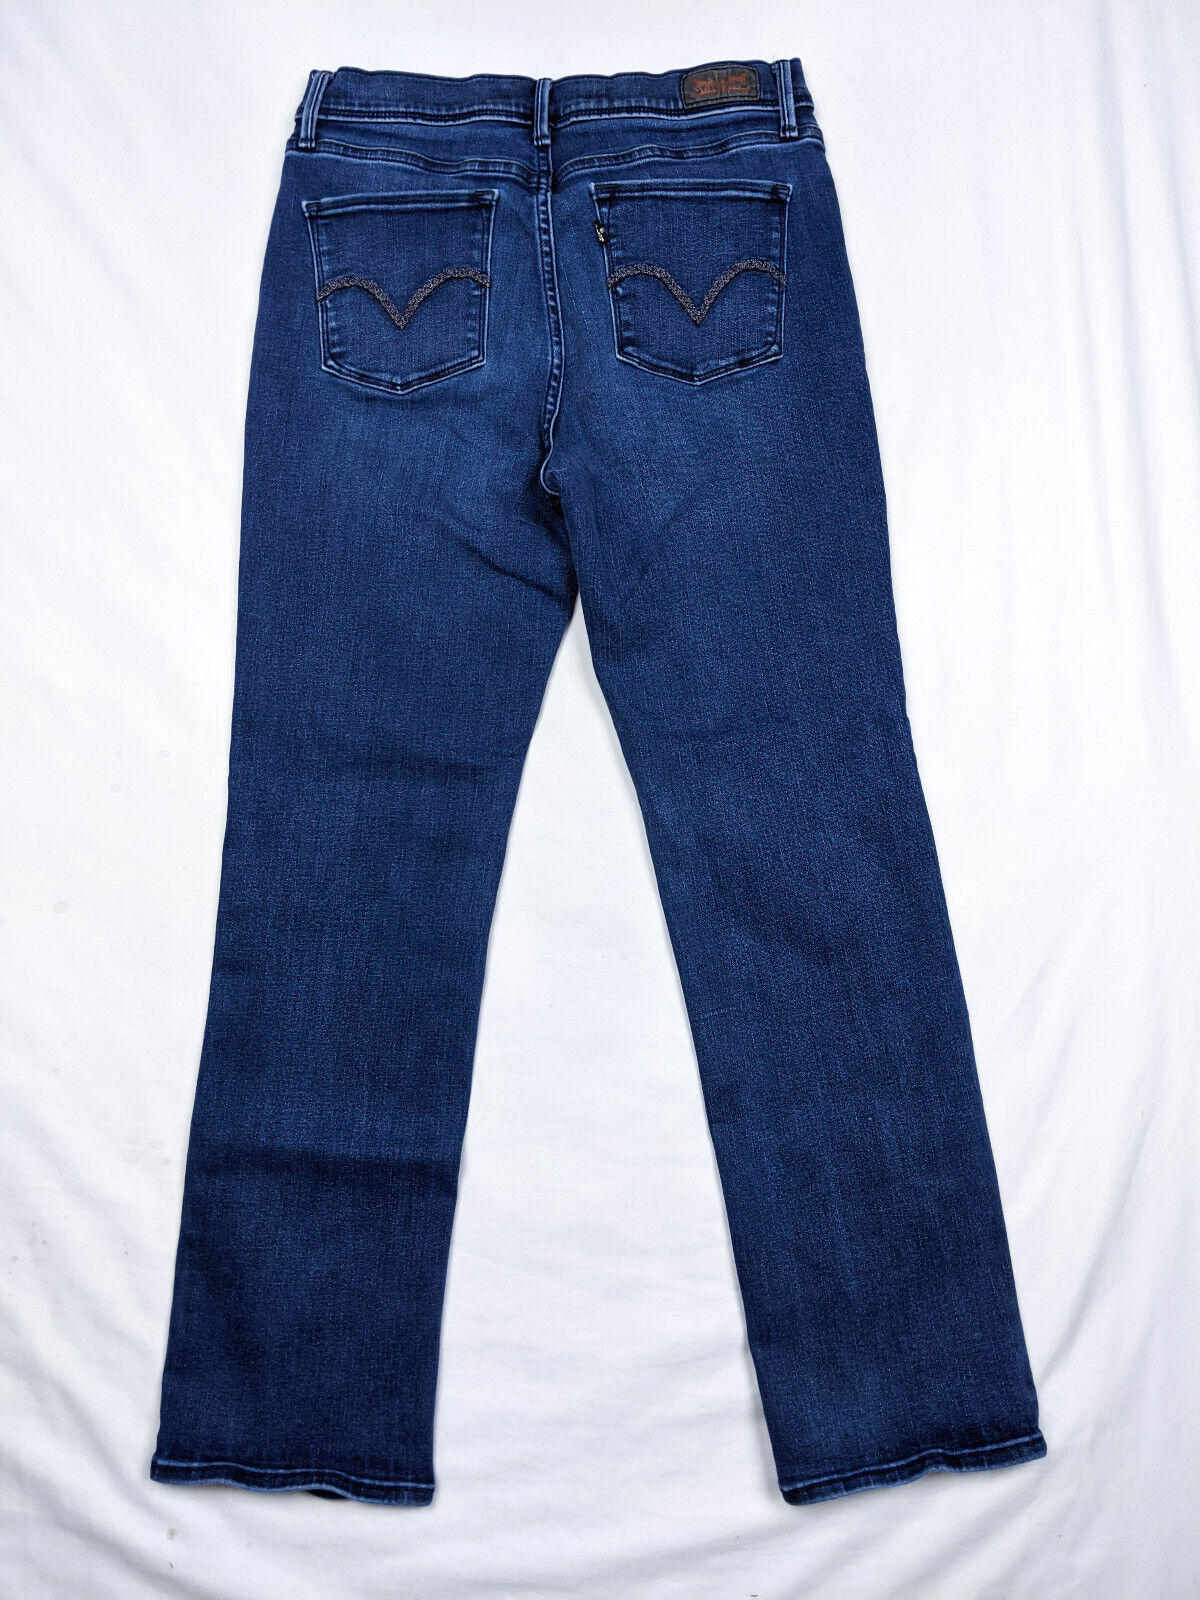 Levis 512 Perfectly Slimming Straight Leg Womens Blue Jeans Petite Size 10P  | eBay